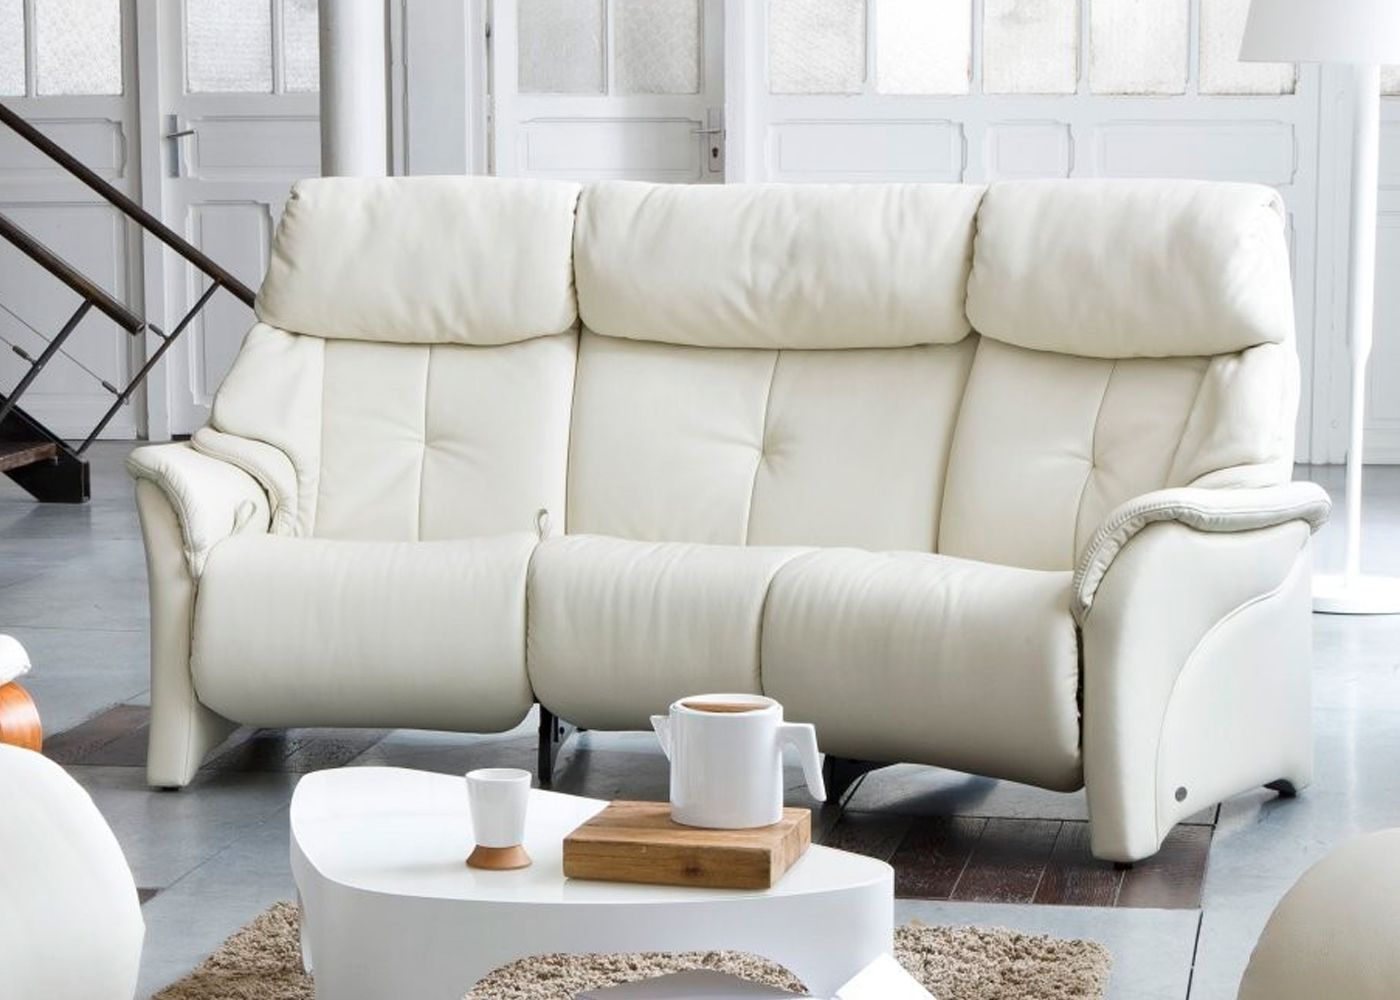 Sofas Center Fascinating Curved Reclining Sofa Photo Design With Regard To Curved Recliner Sofa (Photo 2 of 12)